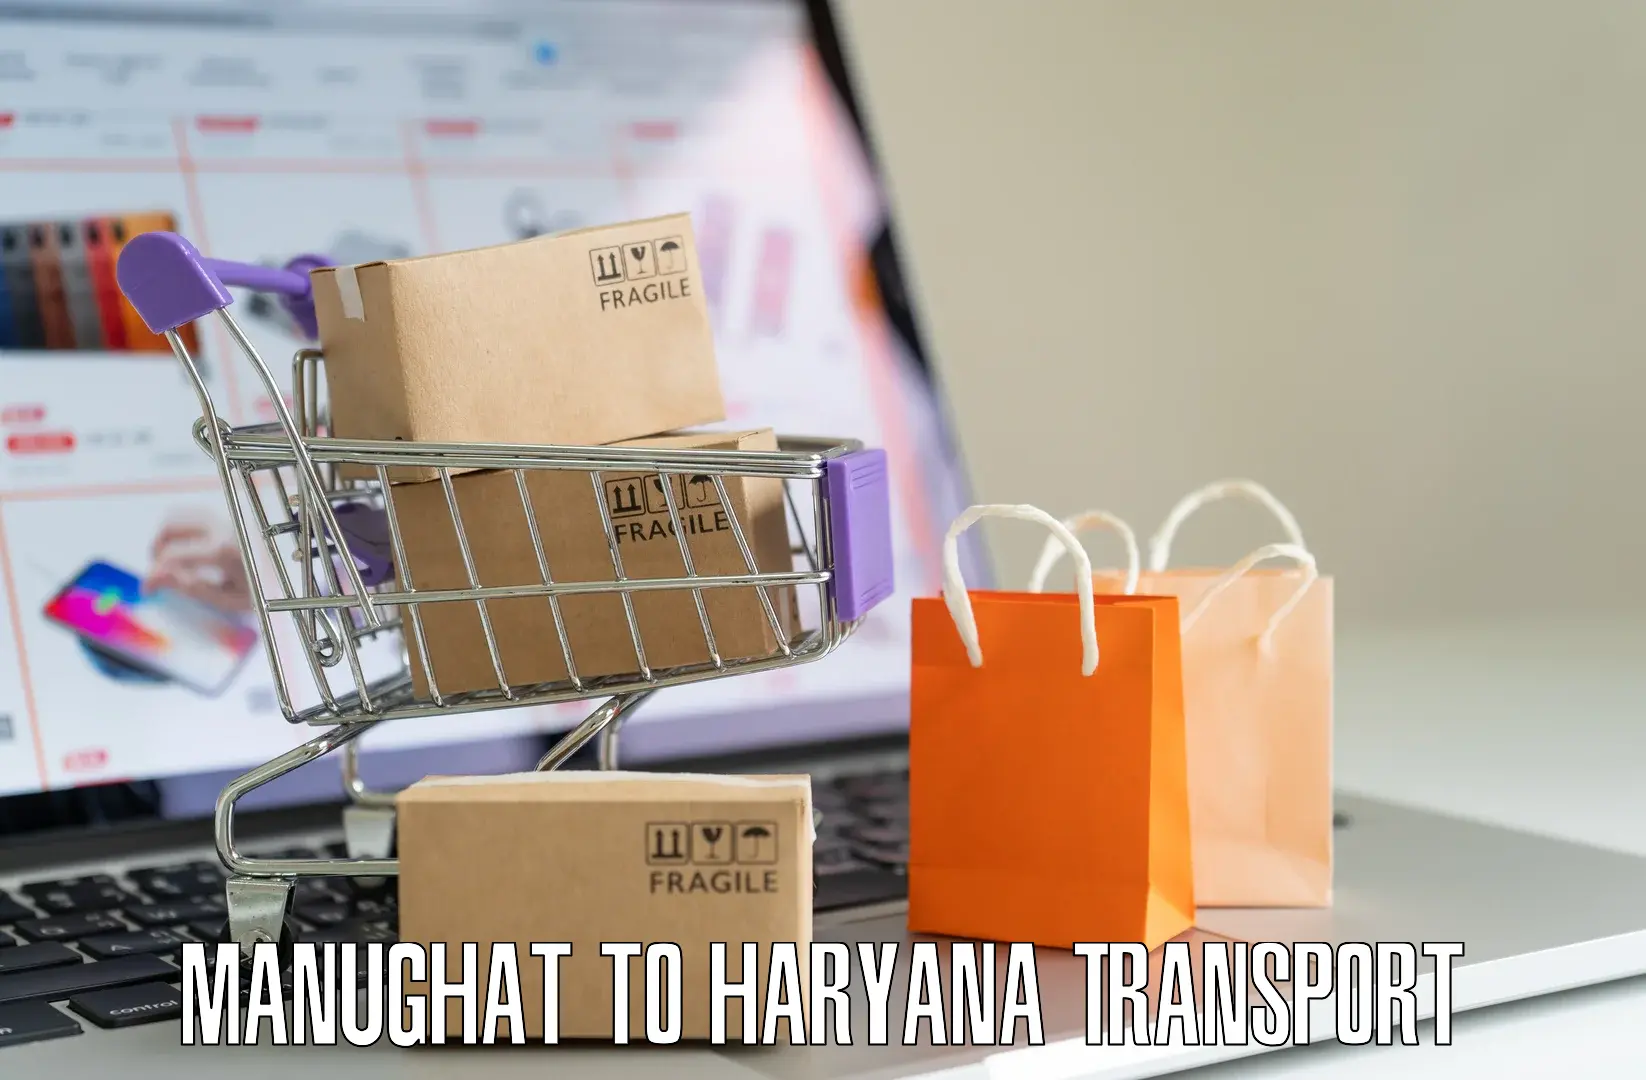 Material transport services Manughat to Gurgaon